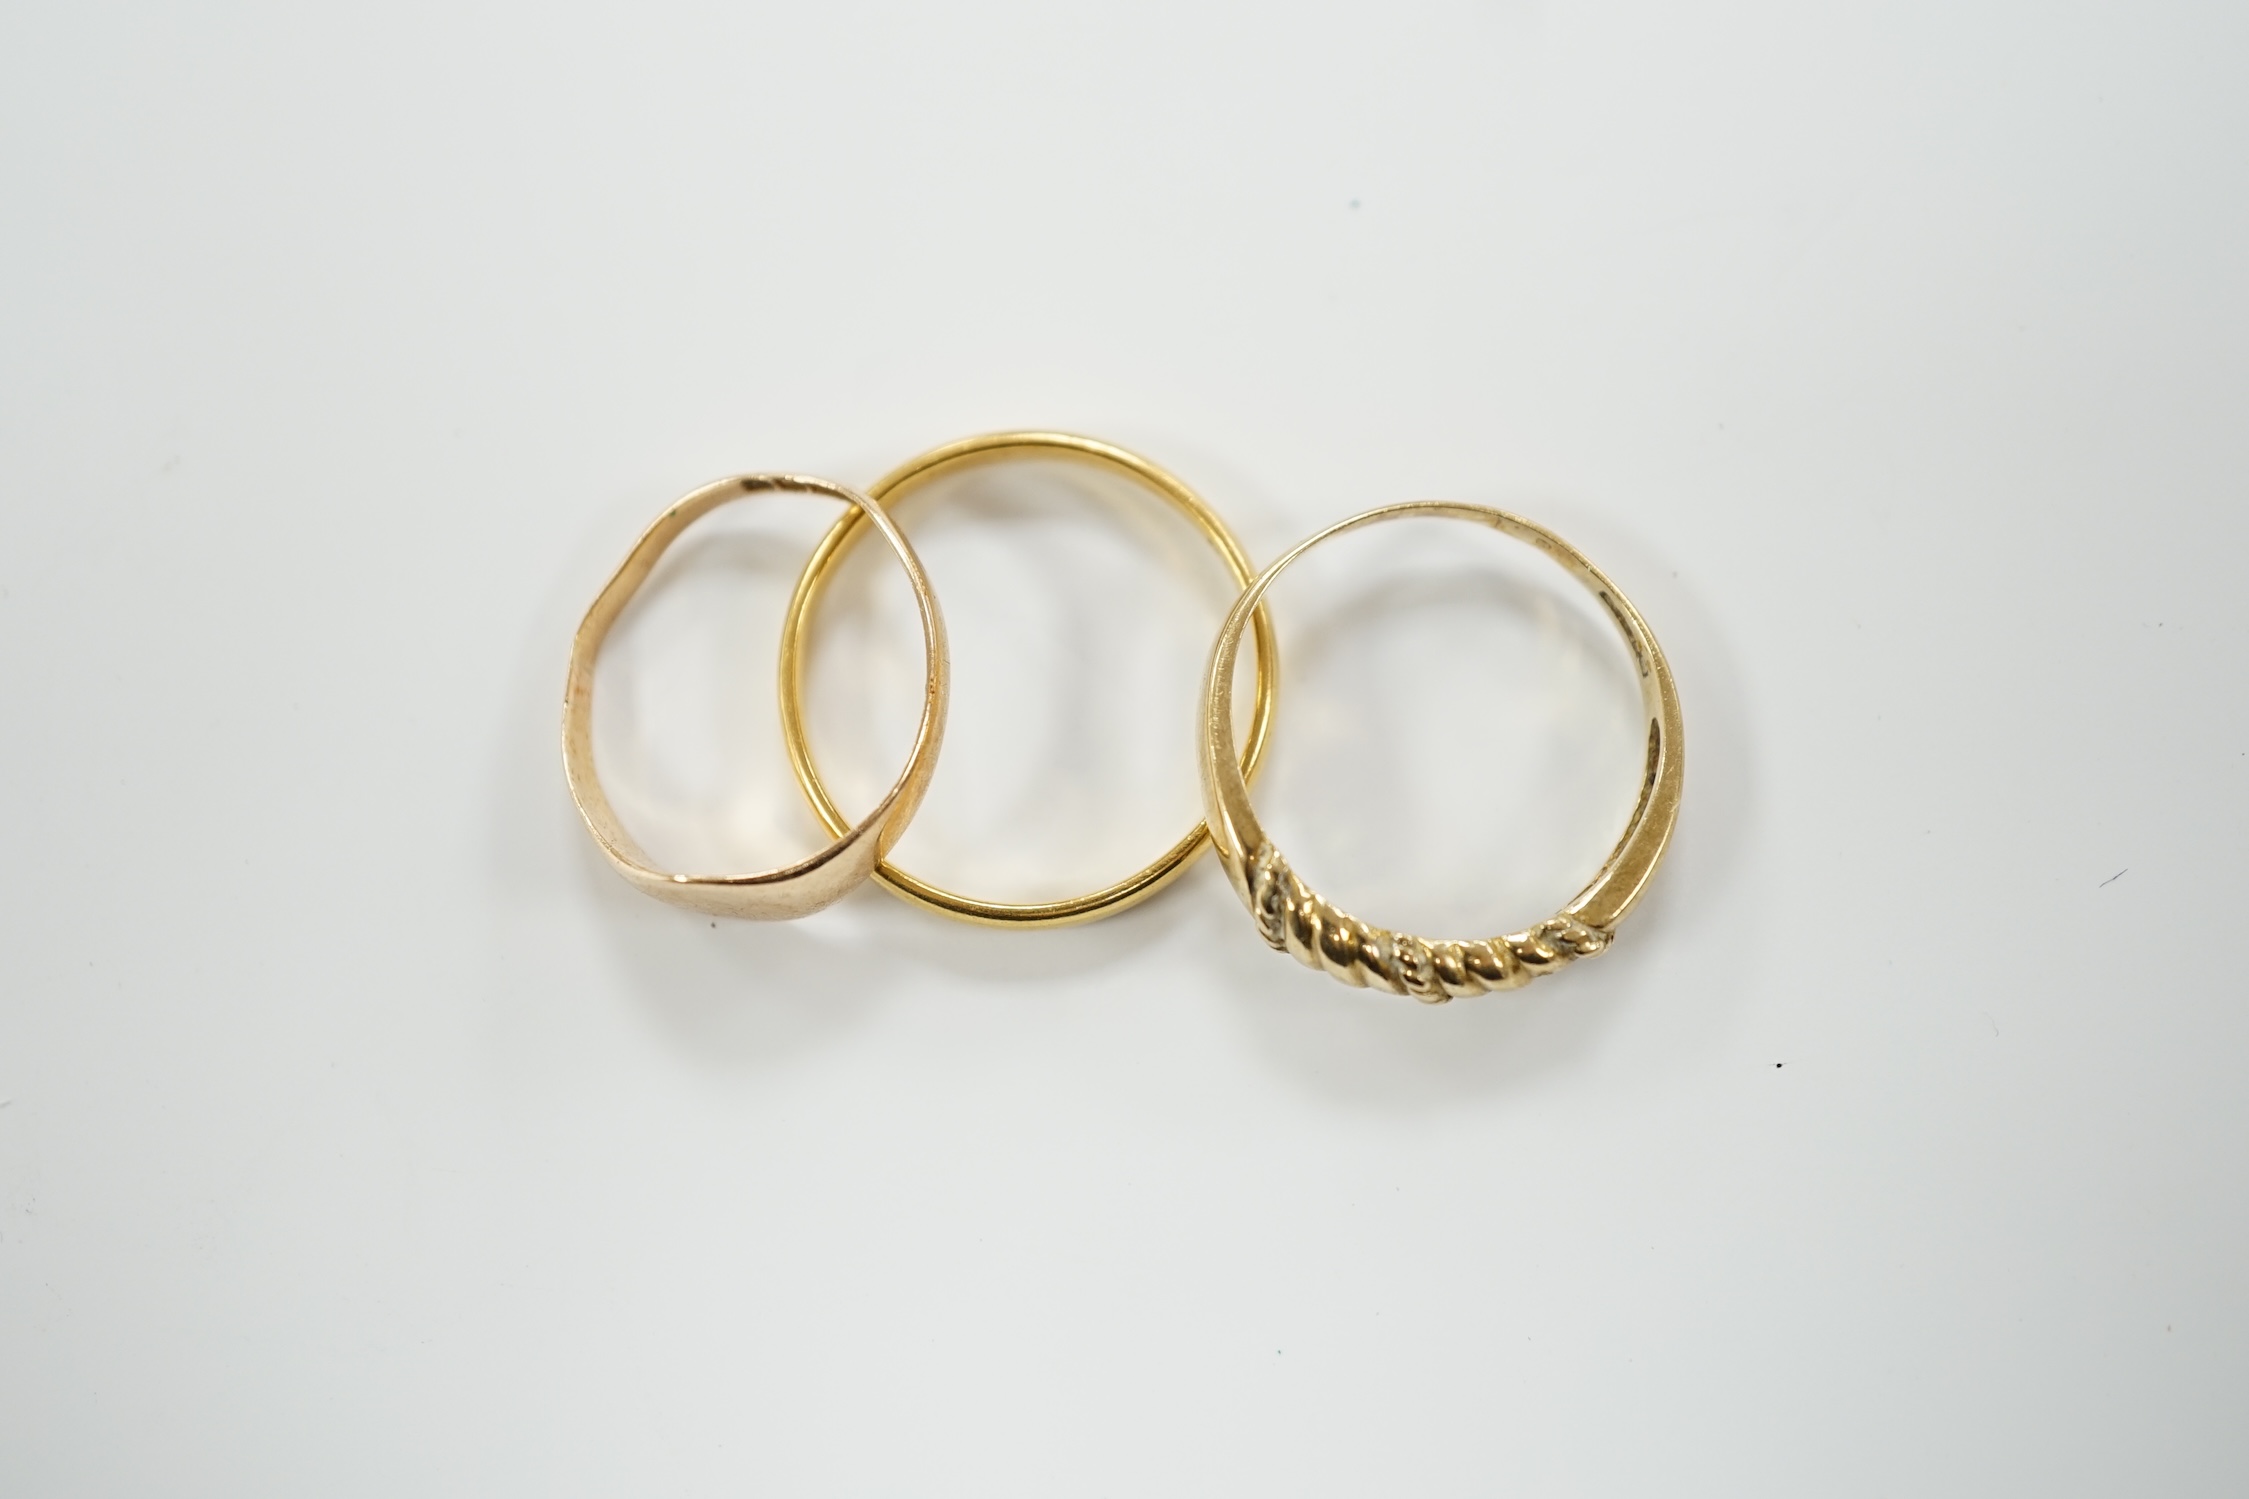 A 22ct gold wedding band, 3.4 grams, a 9ct gold signet ring, 16 grams and a yellow metal ring.